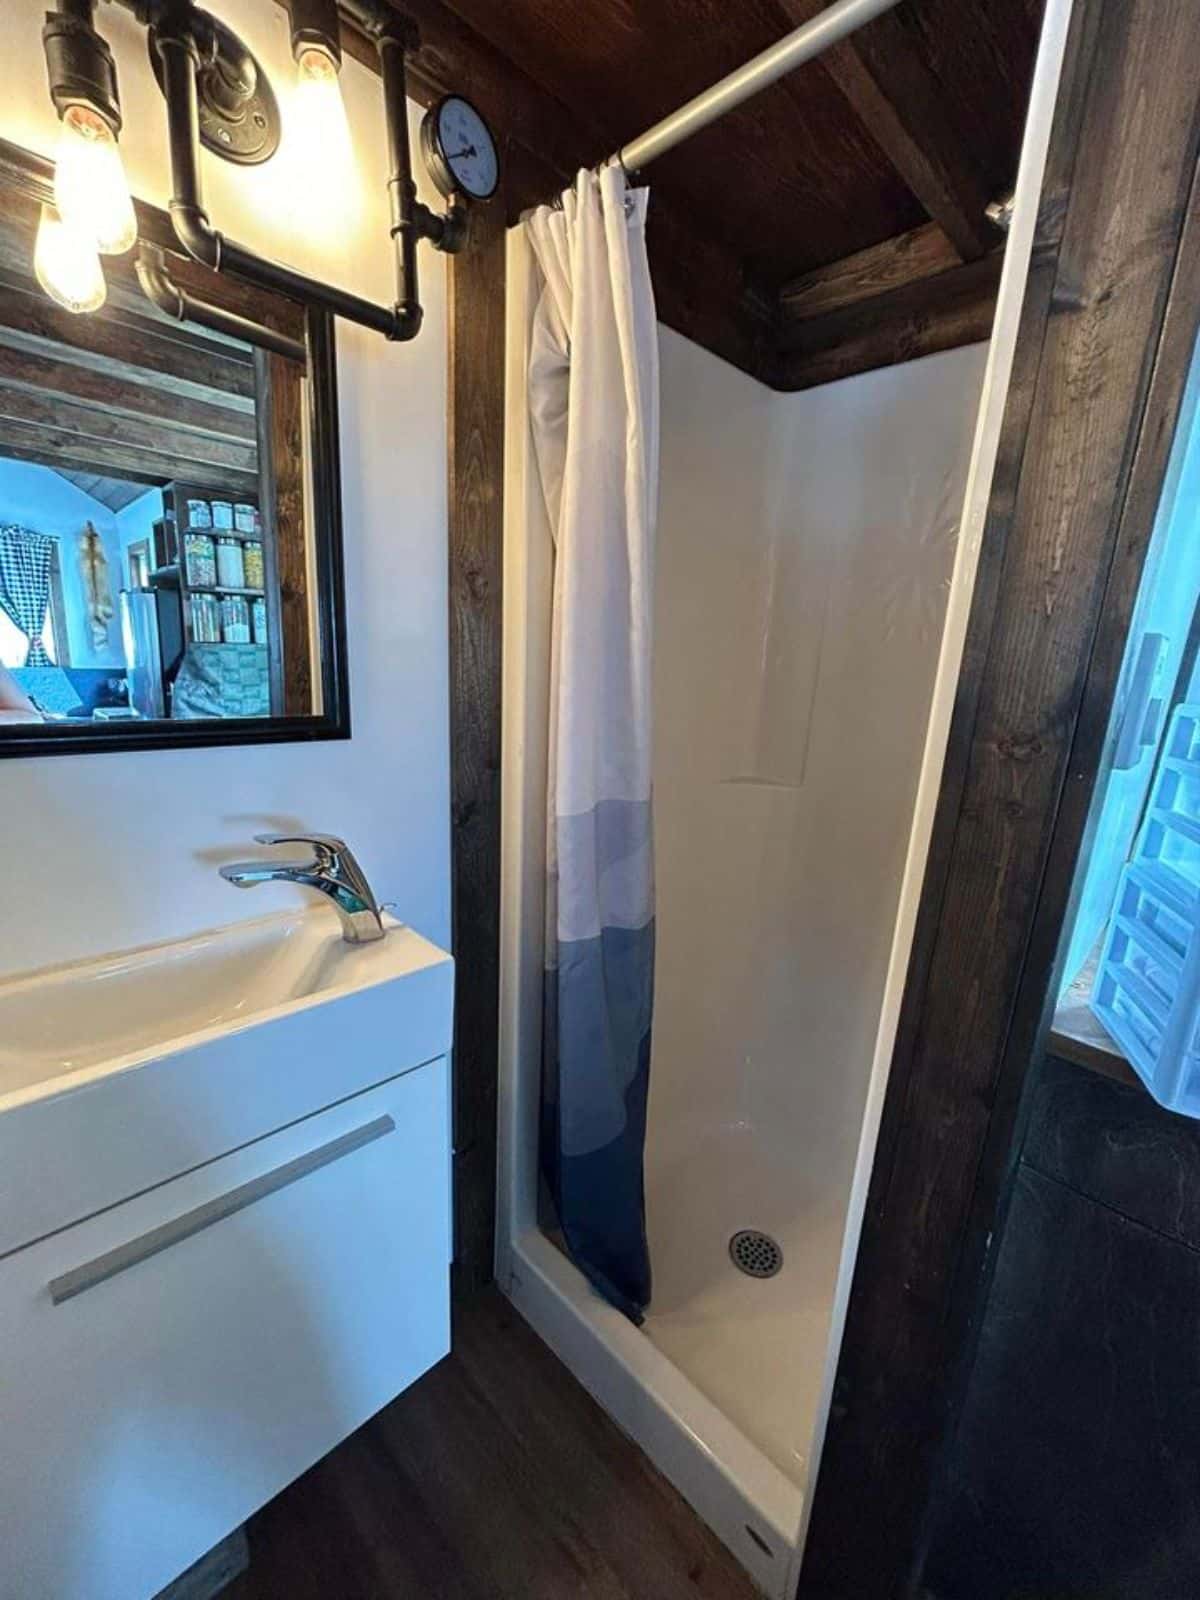 stylish sink with mirror and full length shower area in bathroom